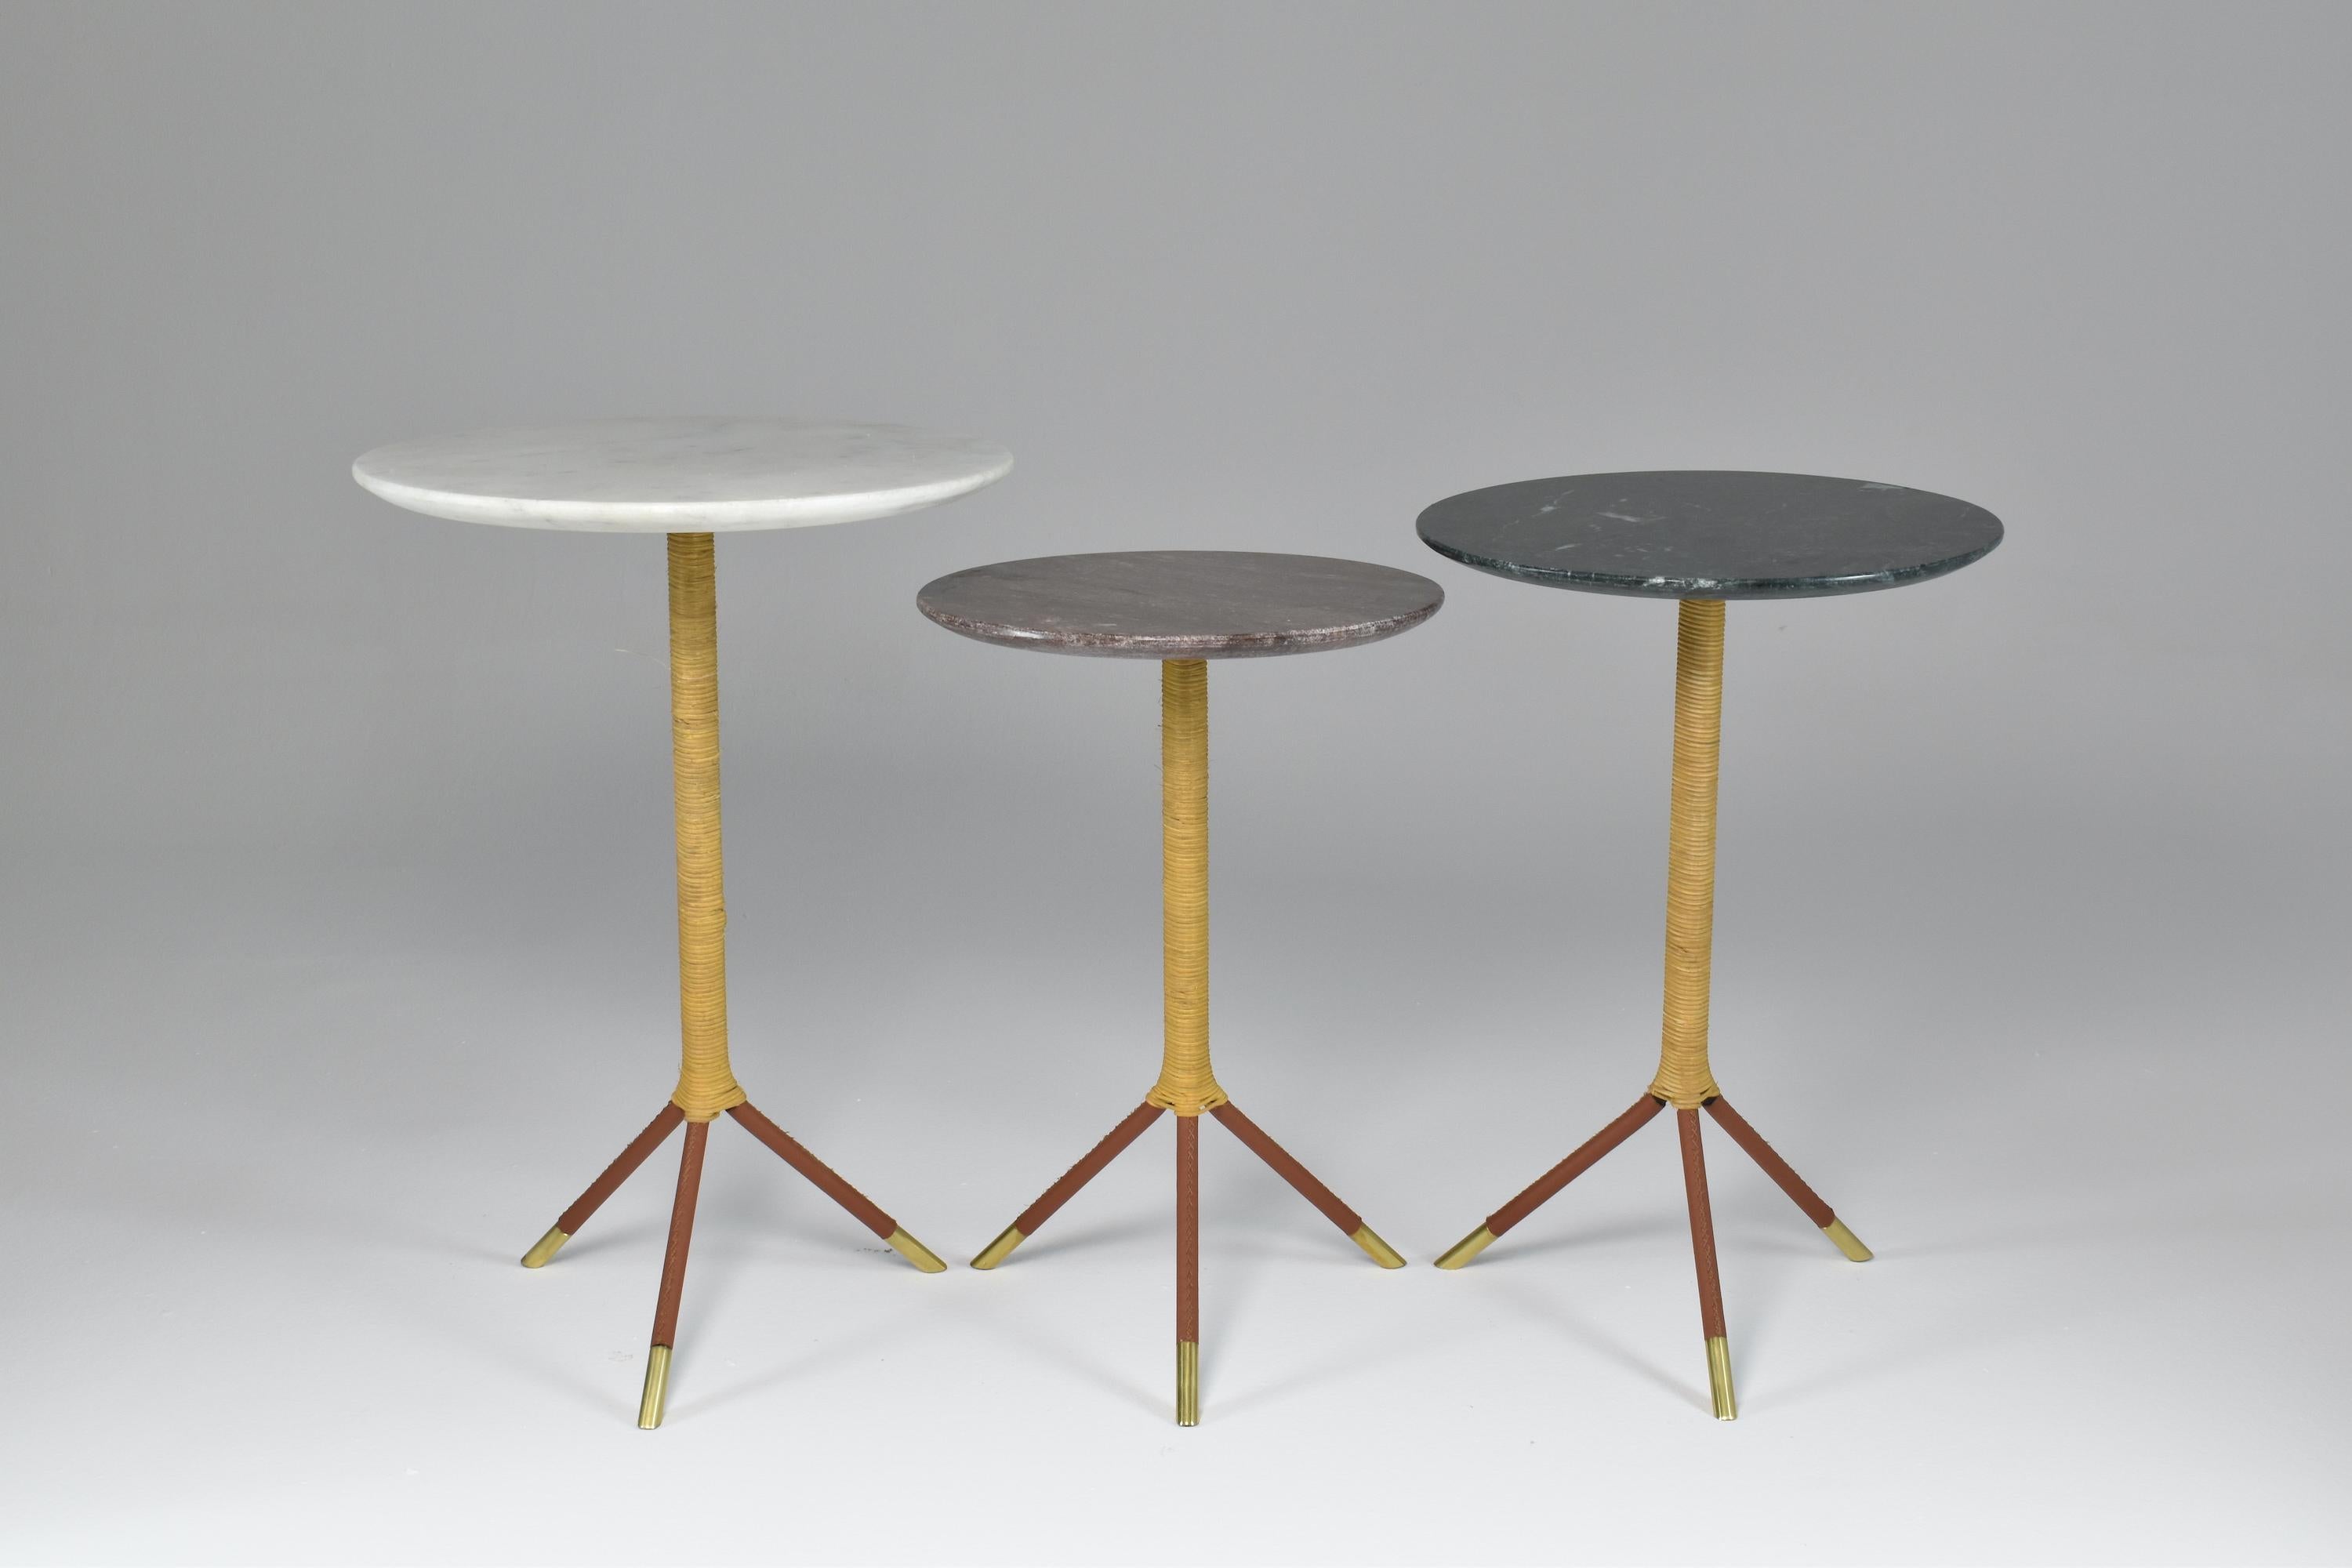 Handcrafted made-to-measure side table designed with a thick polished marble tabletop, a steel structure, and sustainably sourced natural rattan core. The hand-sewn leather sheathed tripod structure is highlighted by chic solid brass endings.